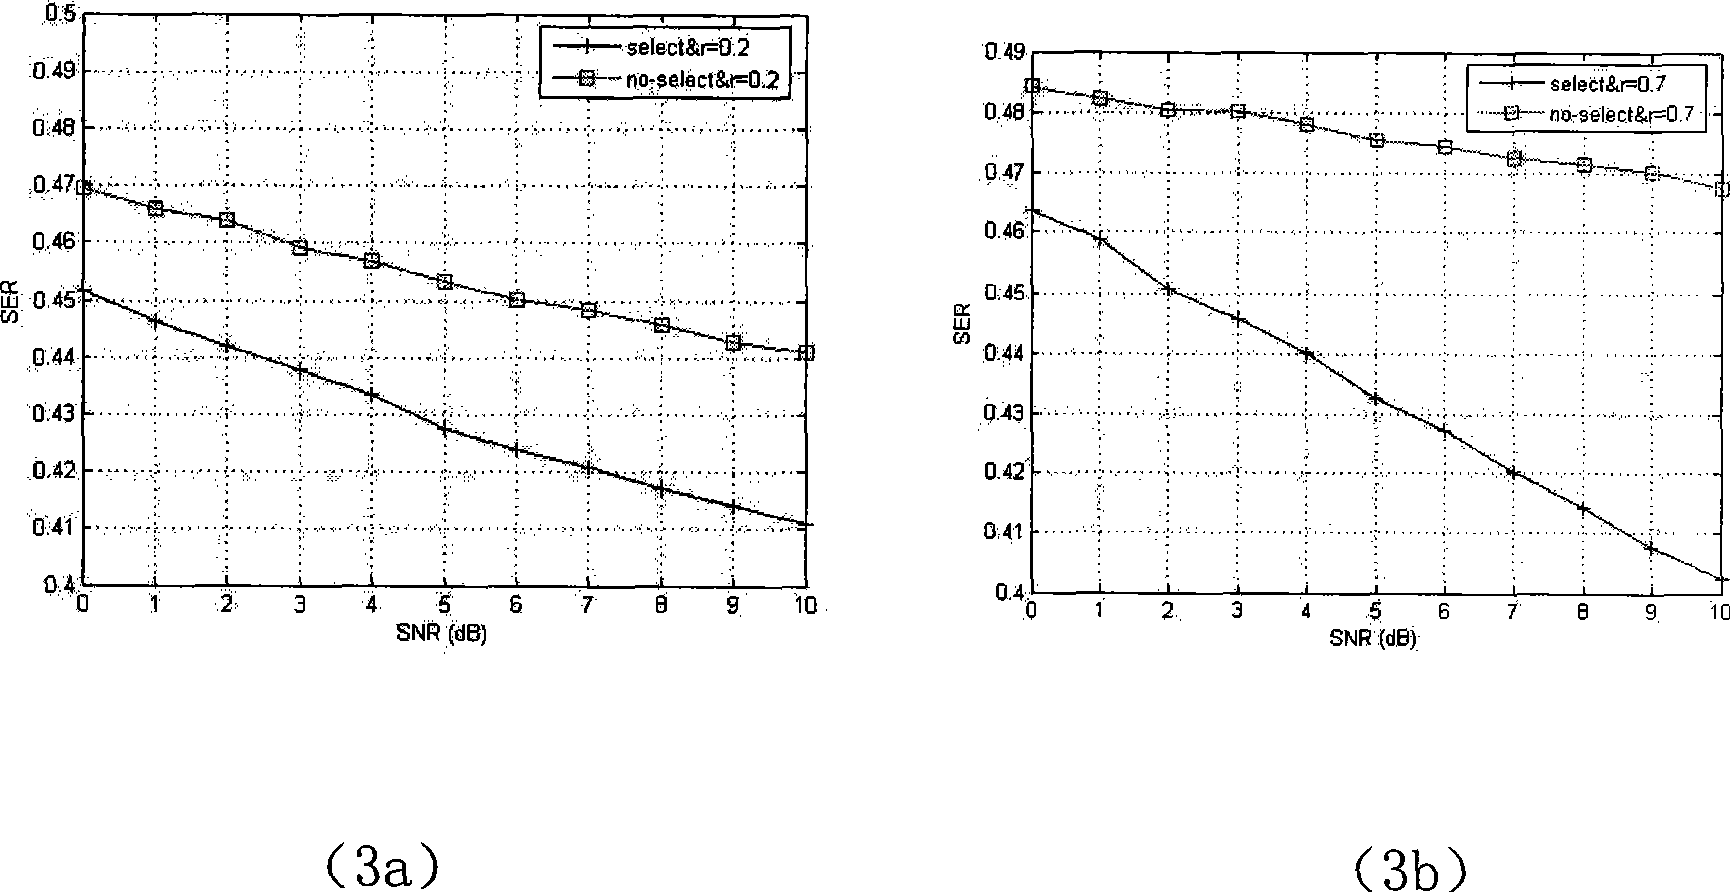 Method of enhancing down-link performance of TD-LTE by antenna selection